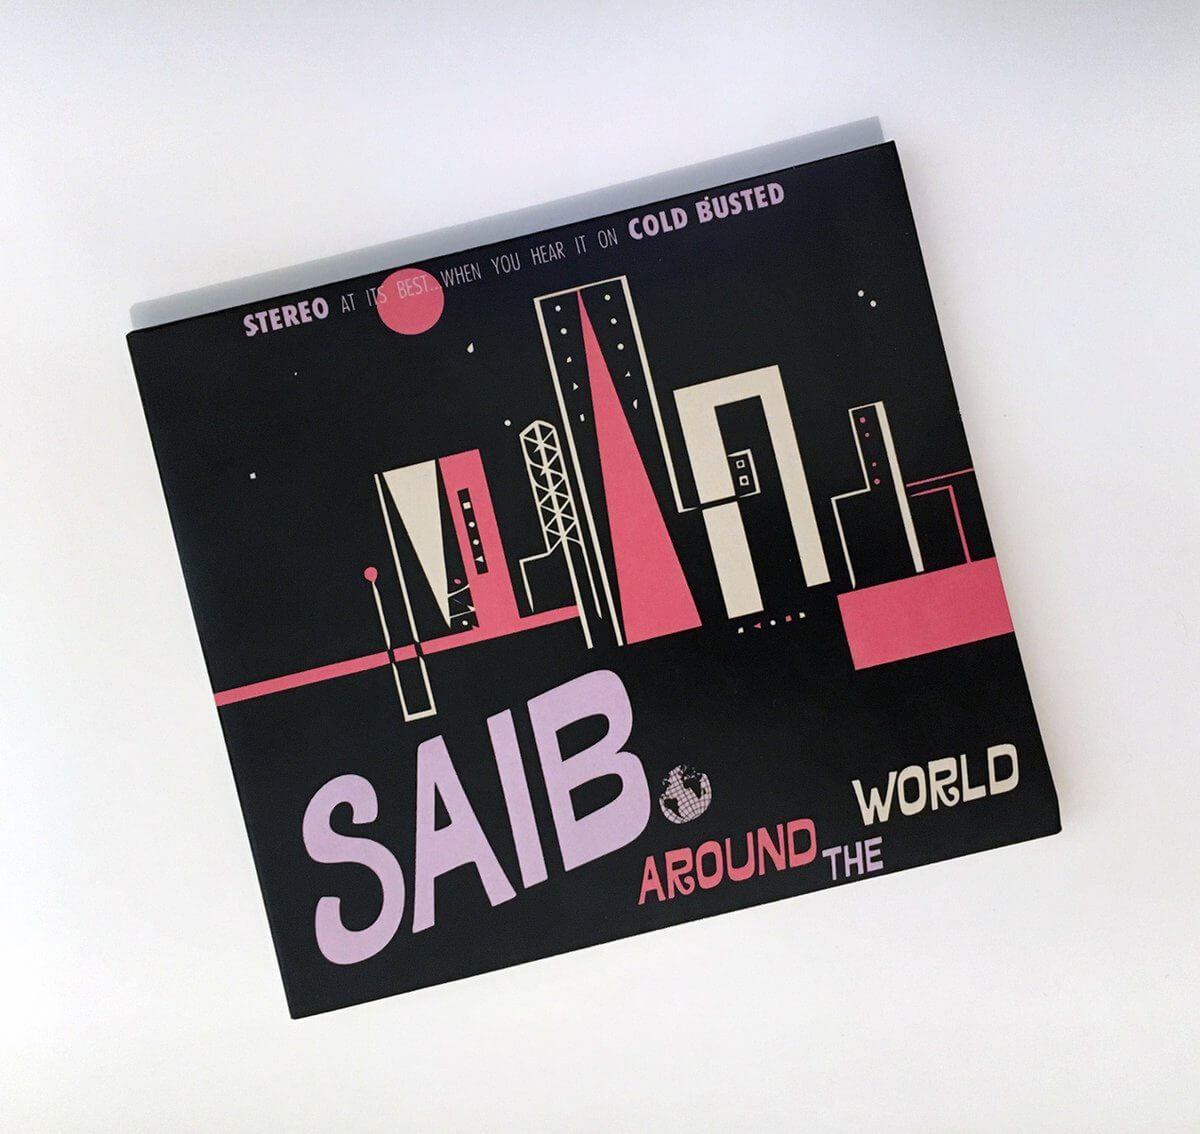 saib. - Around The World - Limited Edition Compact Disc - Cold Busted